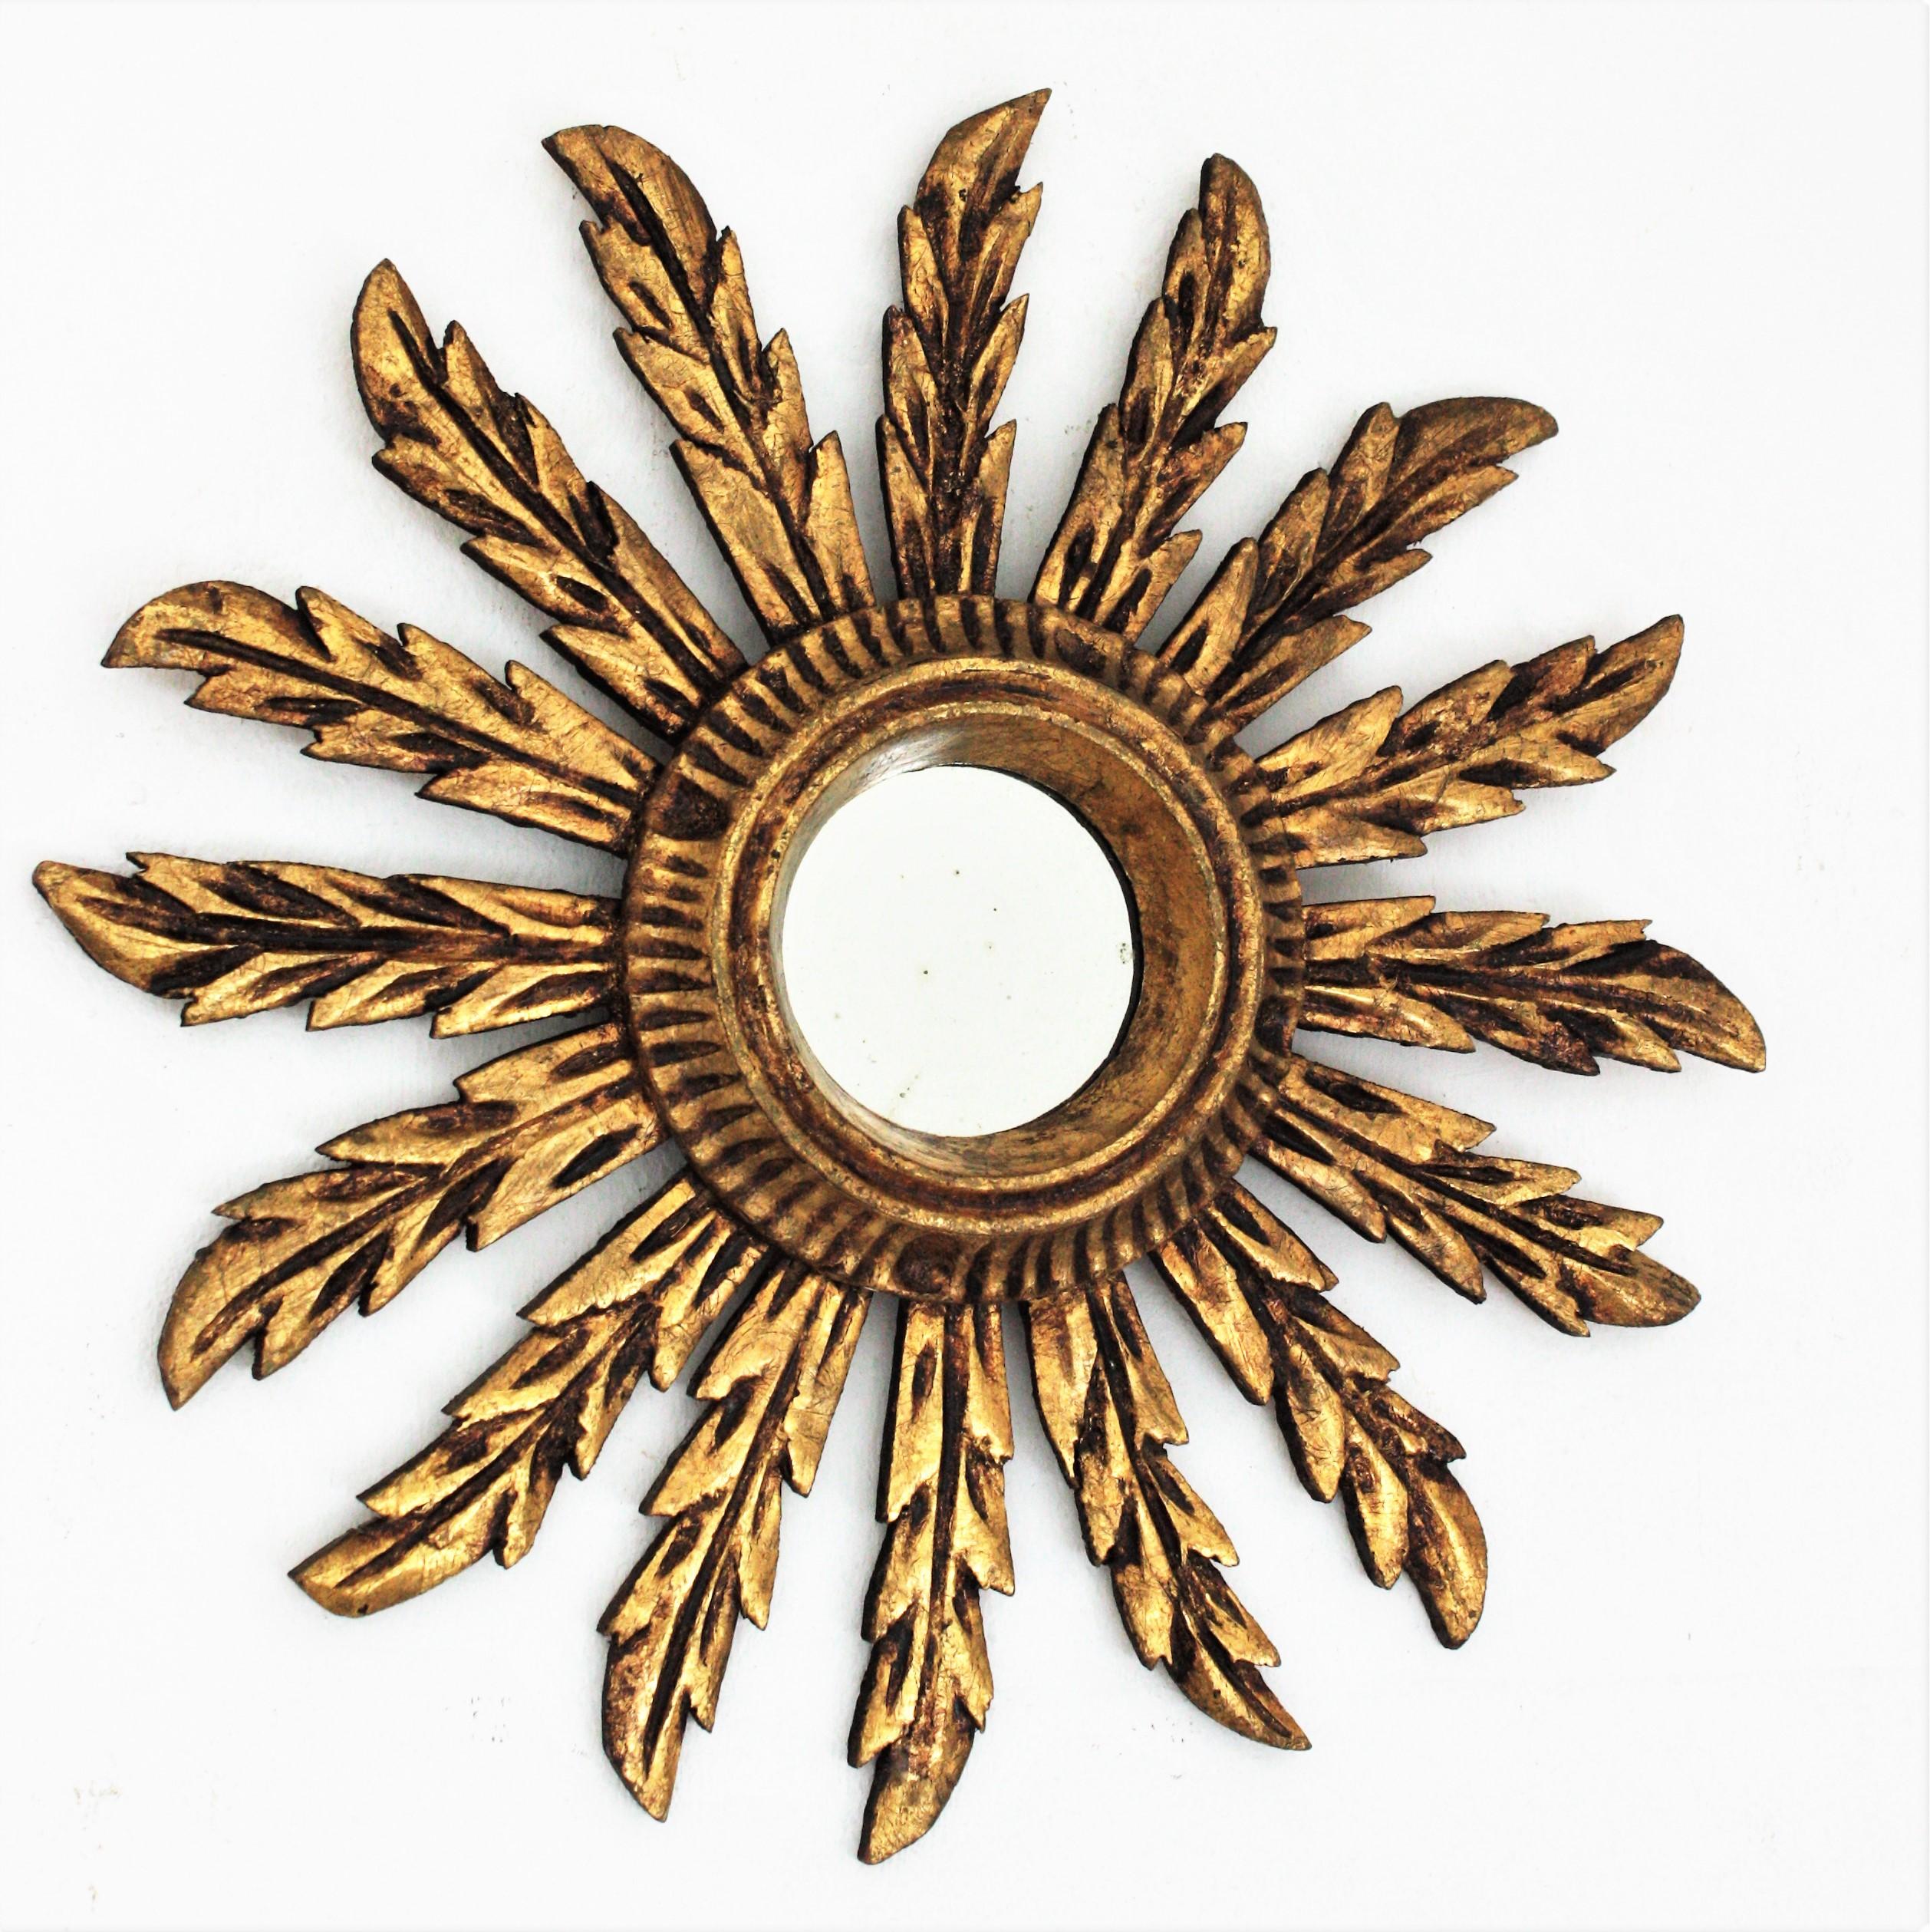 Early 20th century carved giltwood medium sized sunburst mirror in Baroque style.
Beautiful giltwood sunburst mirror with carved leafed frame comprised by 16 leaf rays gilded with gold leaf 
Carved wood covered with gesso and gold leaf finish.